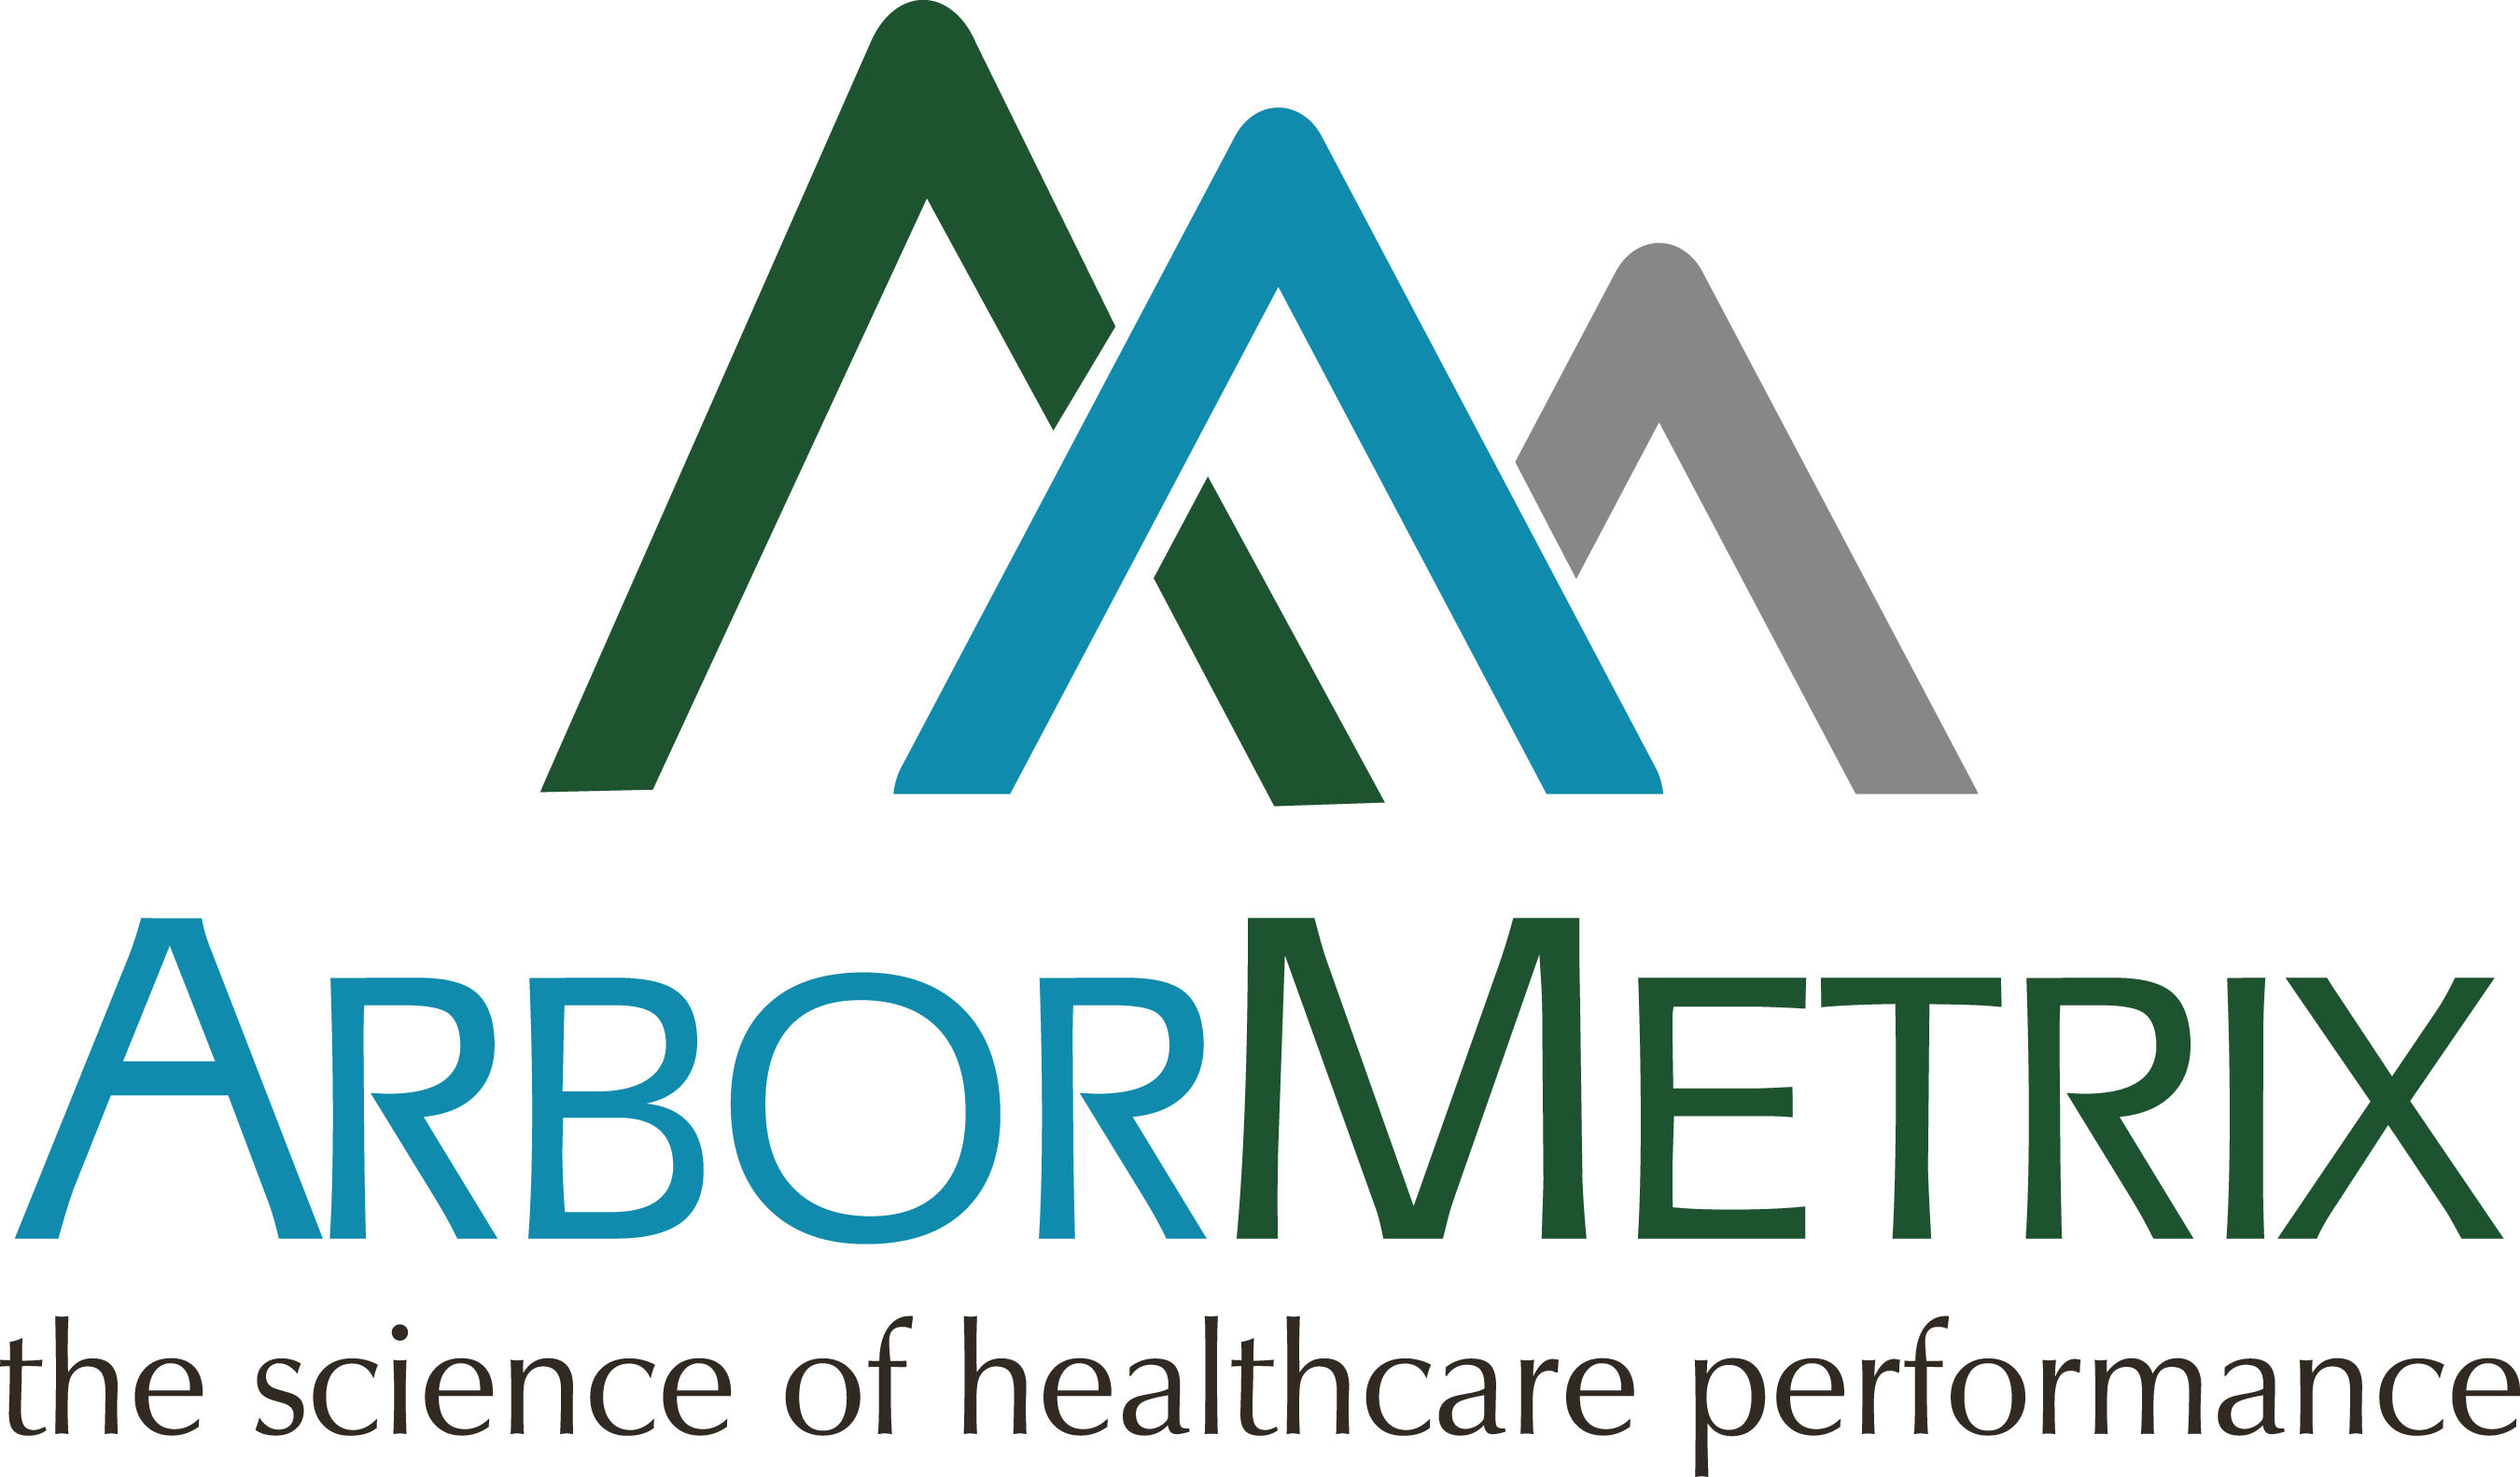 ArborMetrix, Inc. provides a unique, cloud-based platform for performance measurement and clinical intelligence in acute and specialty care. ArborMetrix solutions deliver rigorous data analysis and actionable business intelligence while incorporating advanced risk and reliability adjustments. With valuable insights grounded in clinical evidence, ArborMetrix clients quickly achieve quality improvements and cost savings.